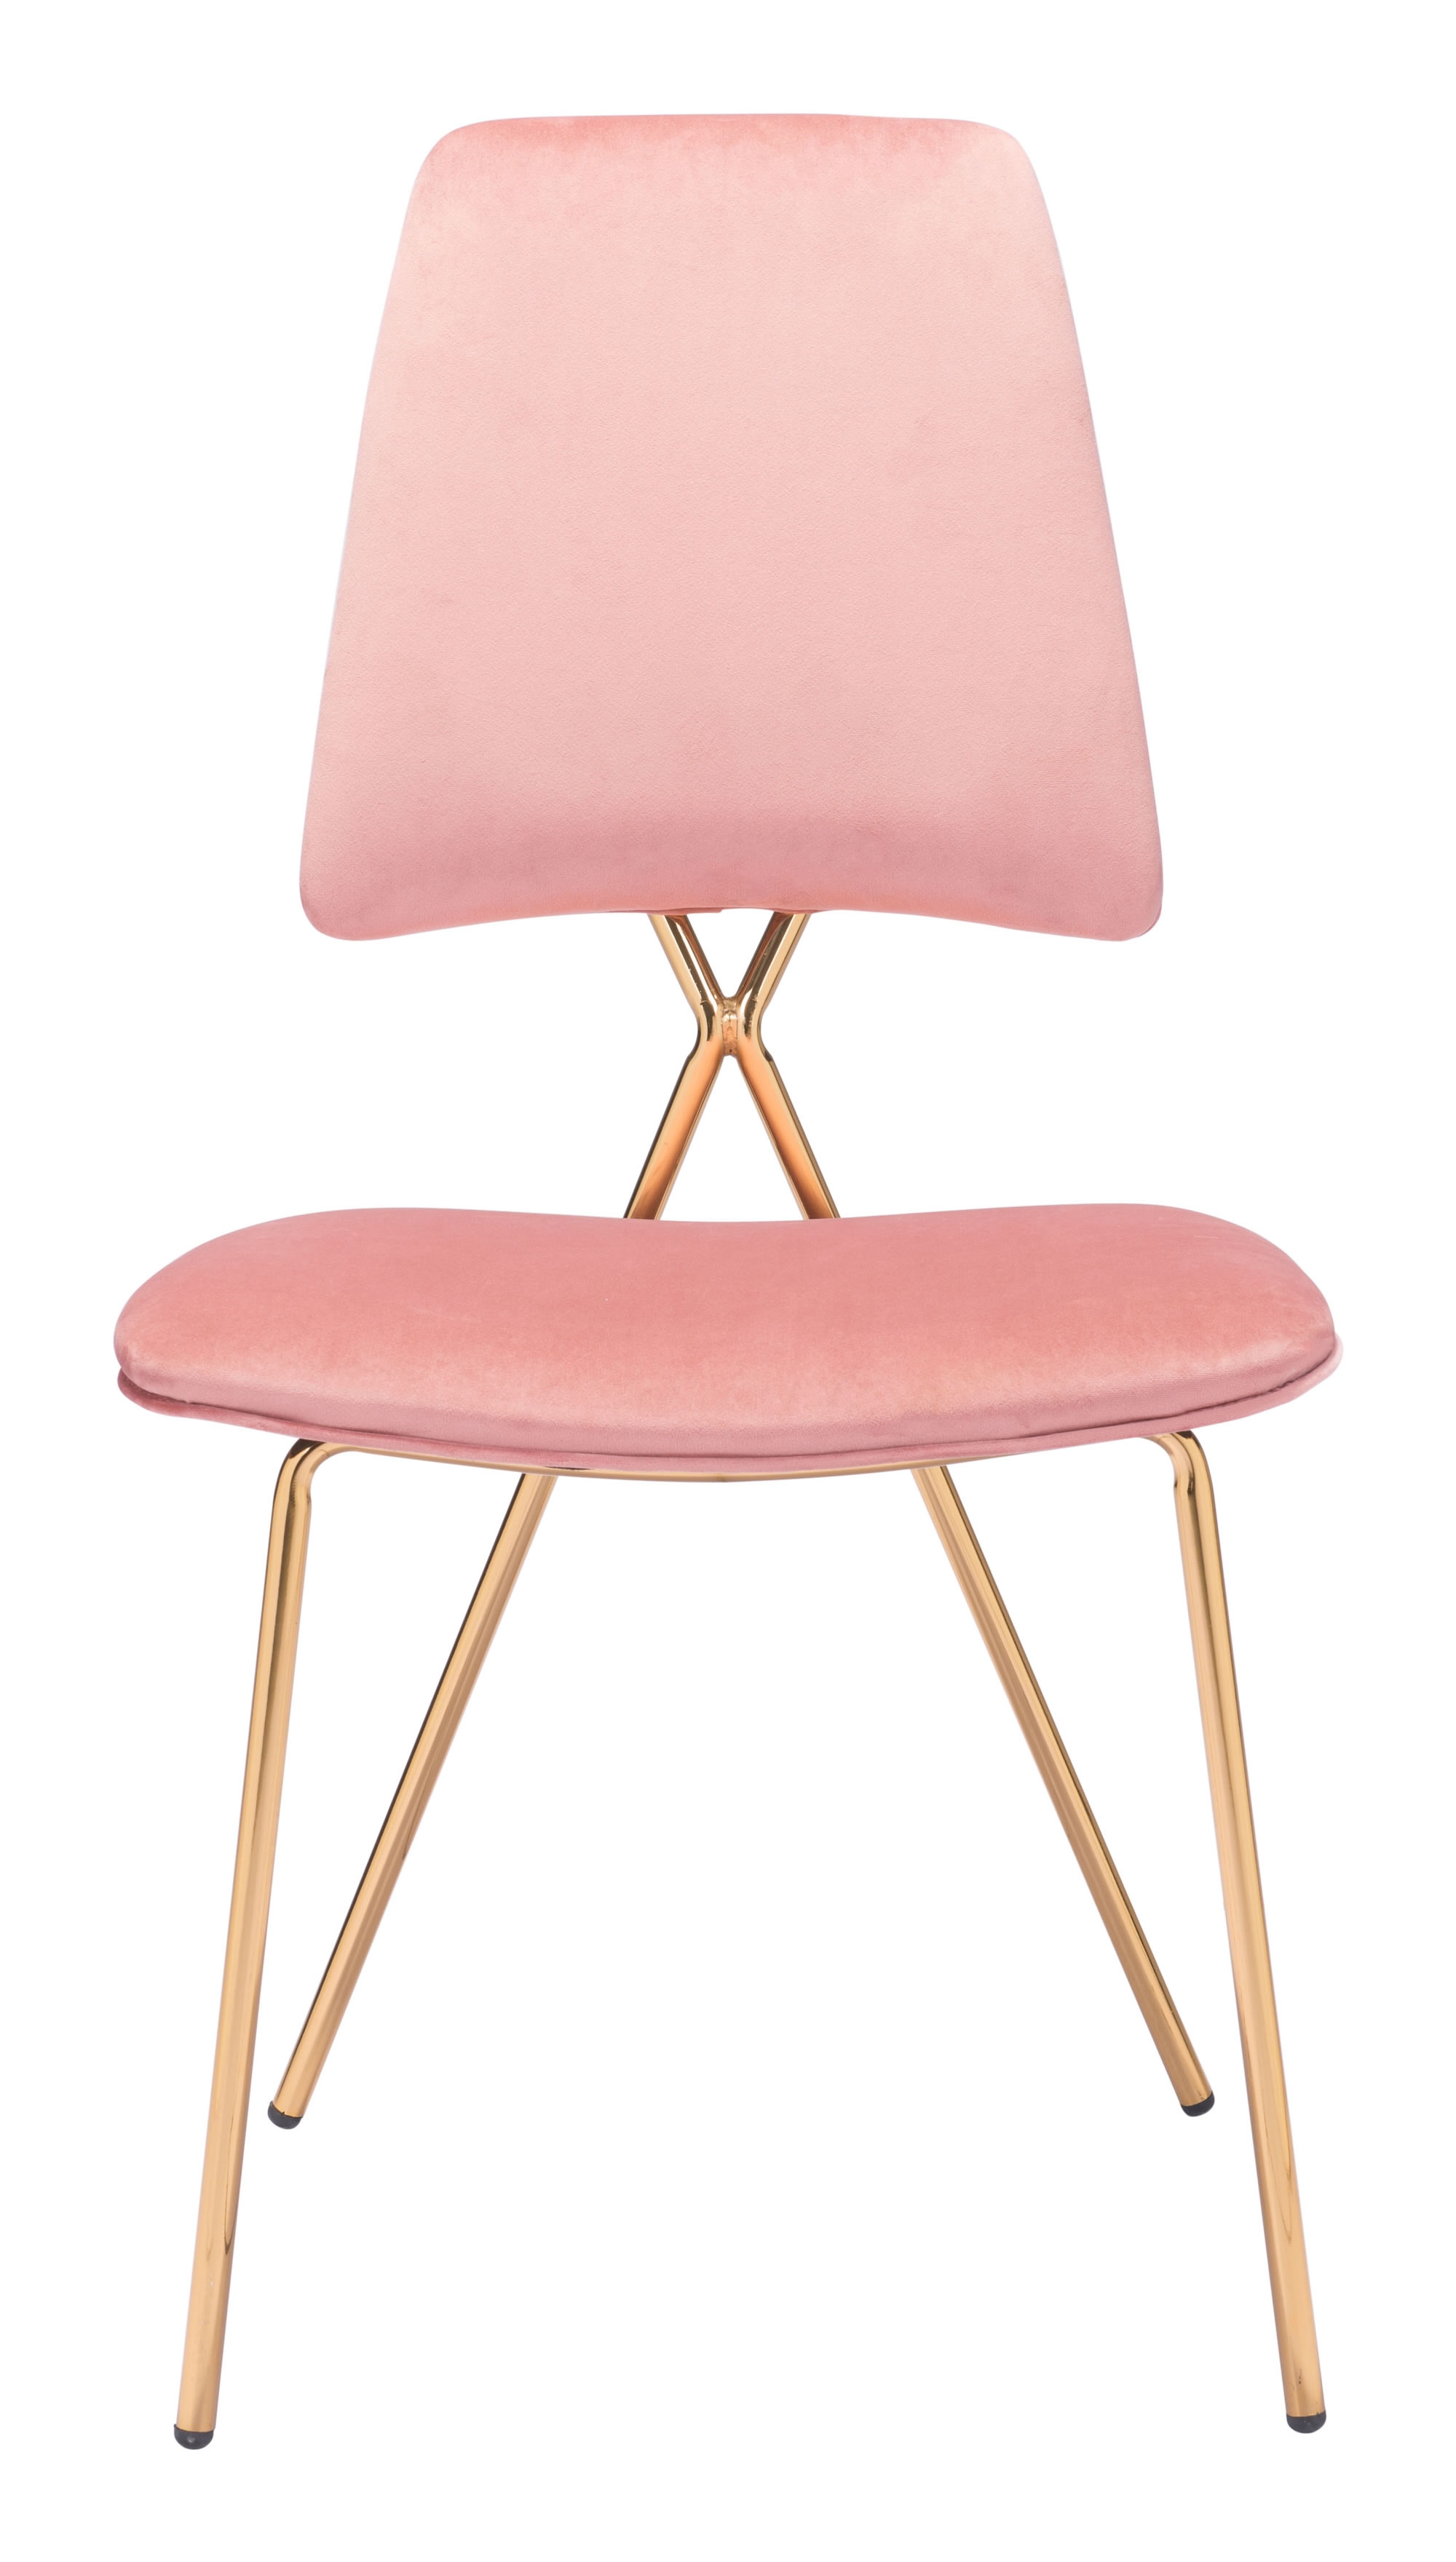 Chloe Dining Chair Pink & Gold (Set of 2) - Image 2